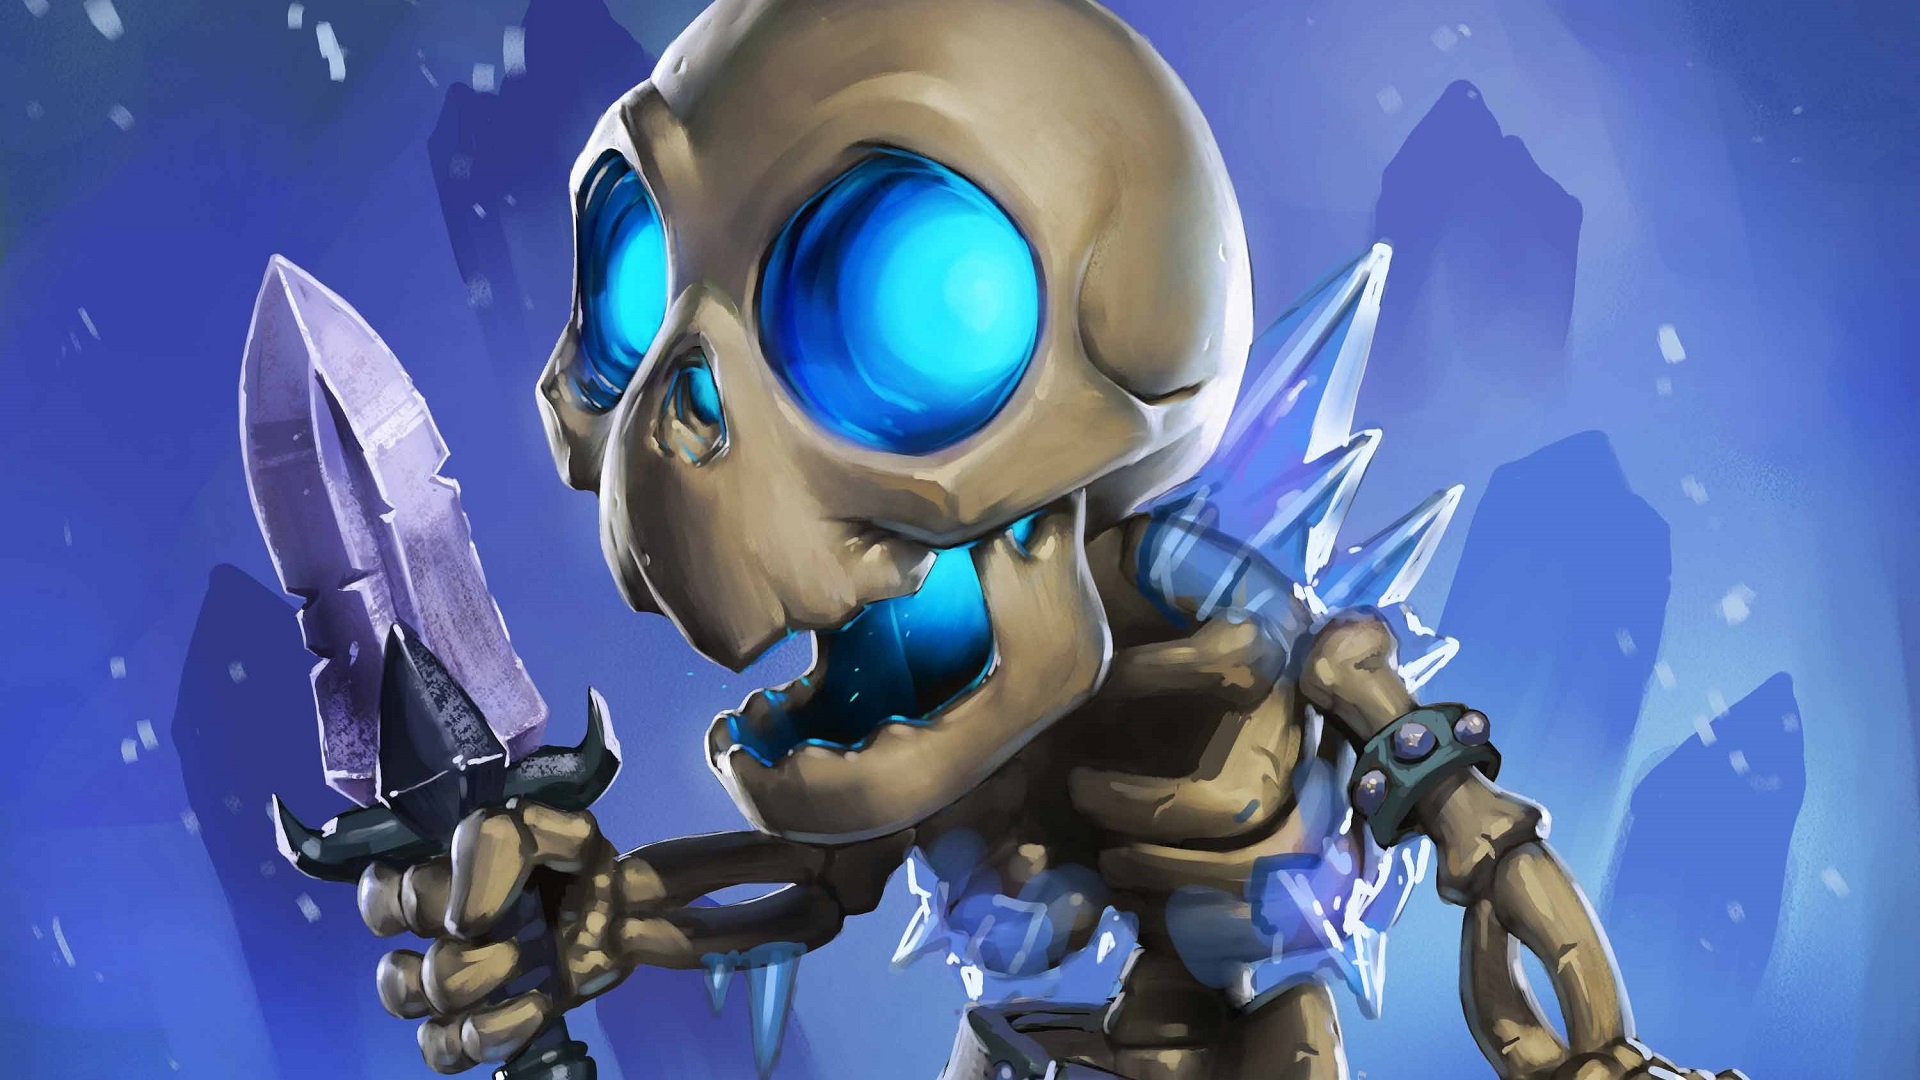 Hearthstone: Heroes of Warcraft, Hearthstone, Warcraft, Cards, Artwork, Knights of the frozen throne, Skeleton, Video games Wallpaper